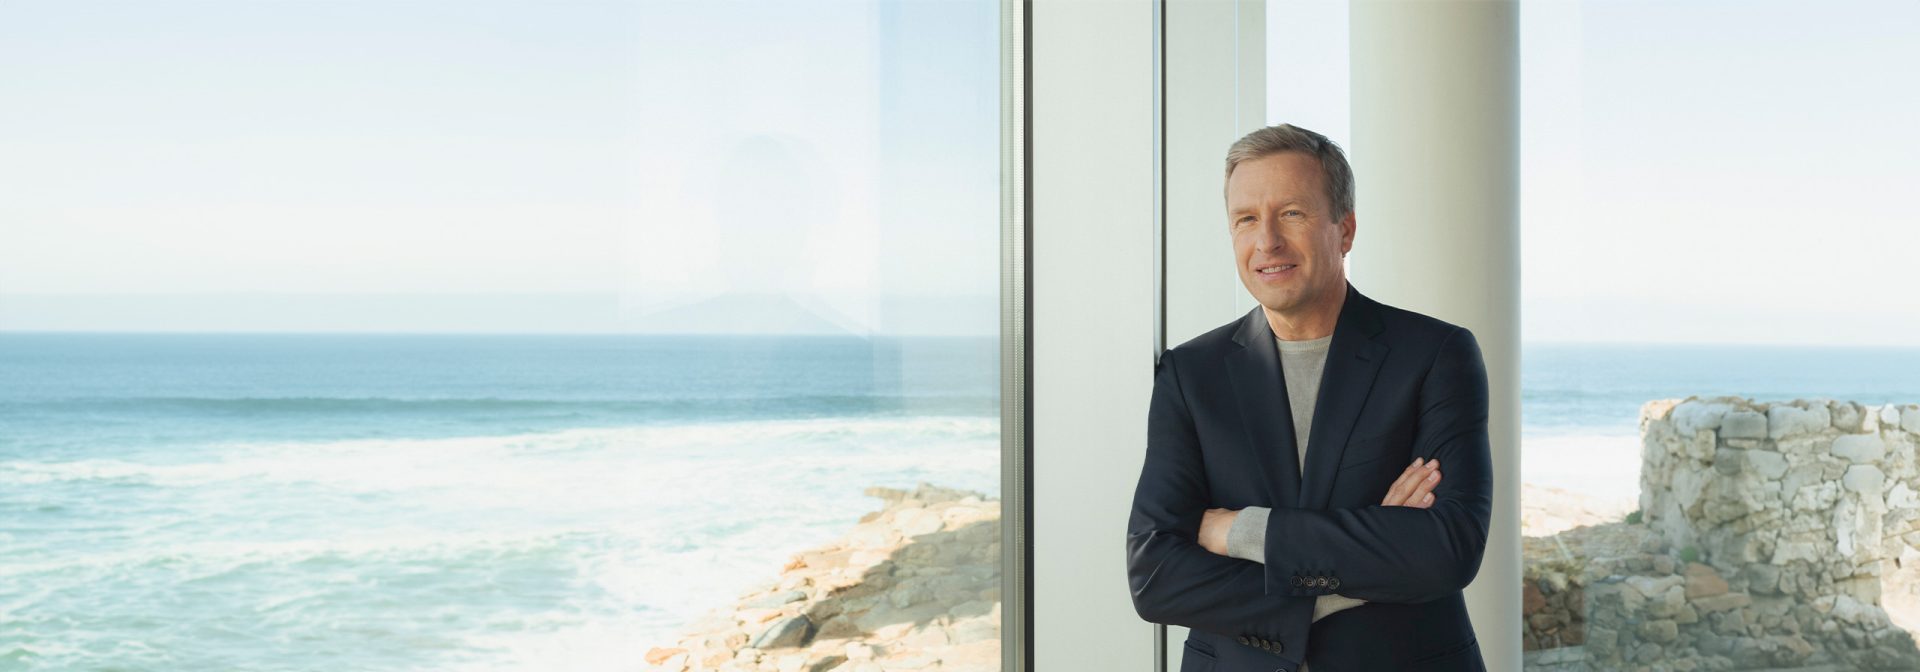 Oliver Zipse the CEO of the BMW Group standing next to a windowfront. The Sea in the background.